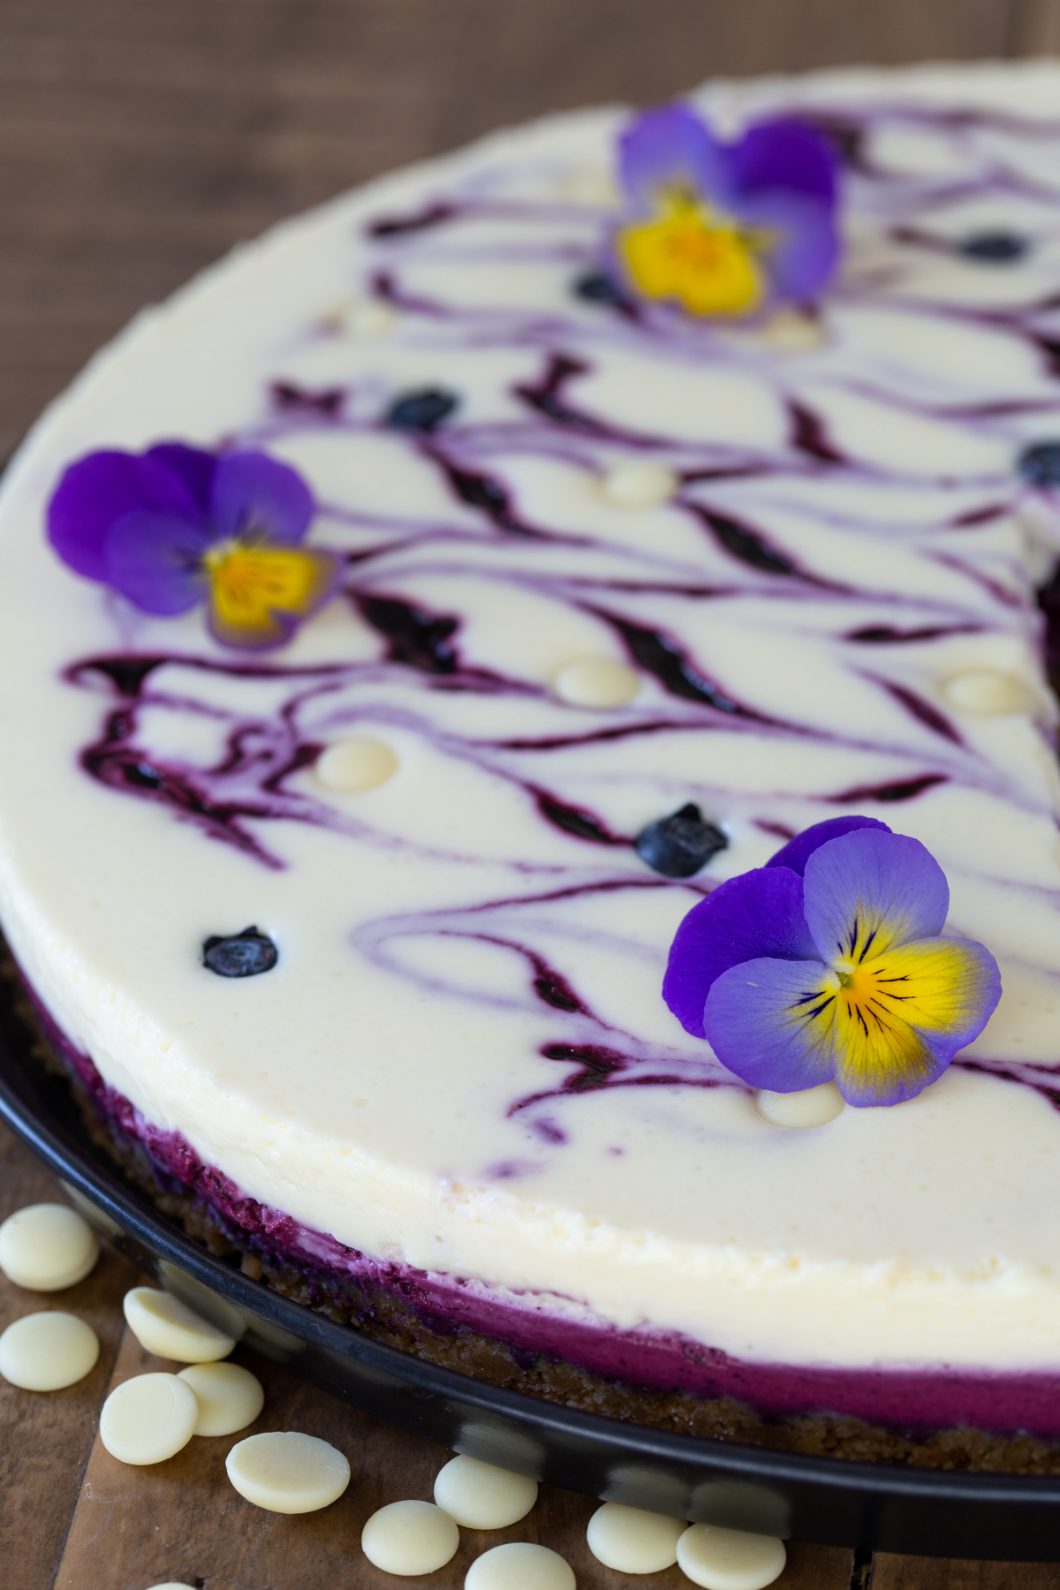 No-bake blueberry white chocolate cheesecake topped with pansies.